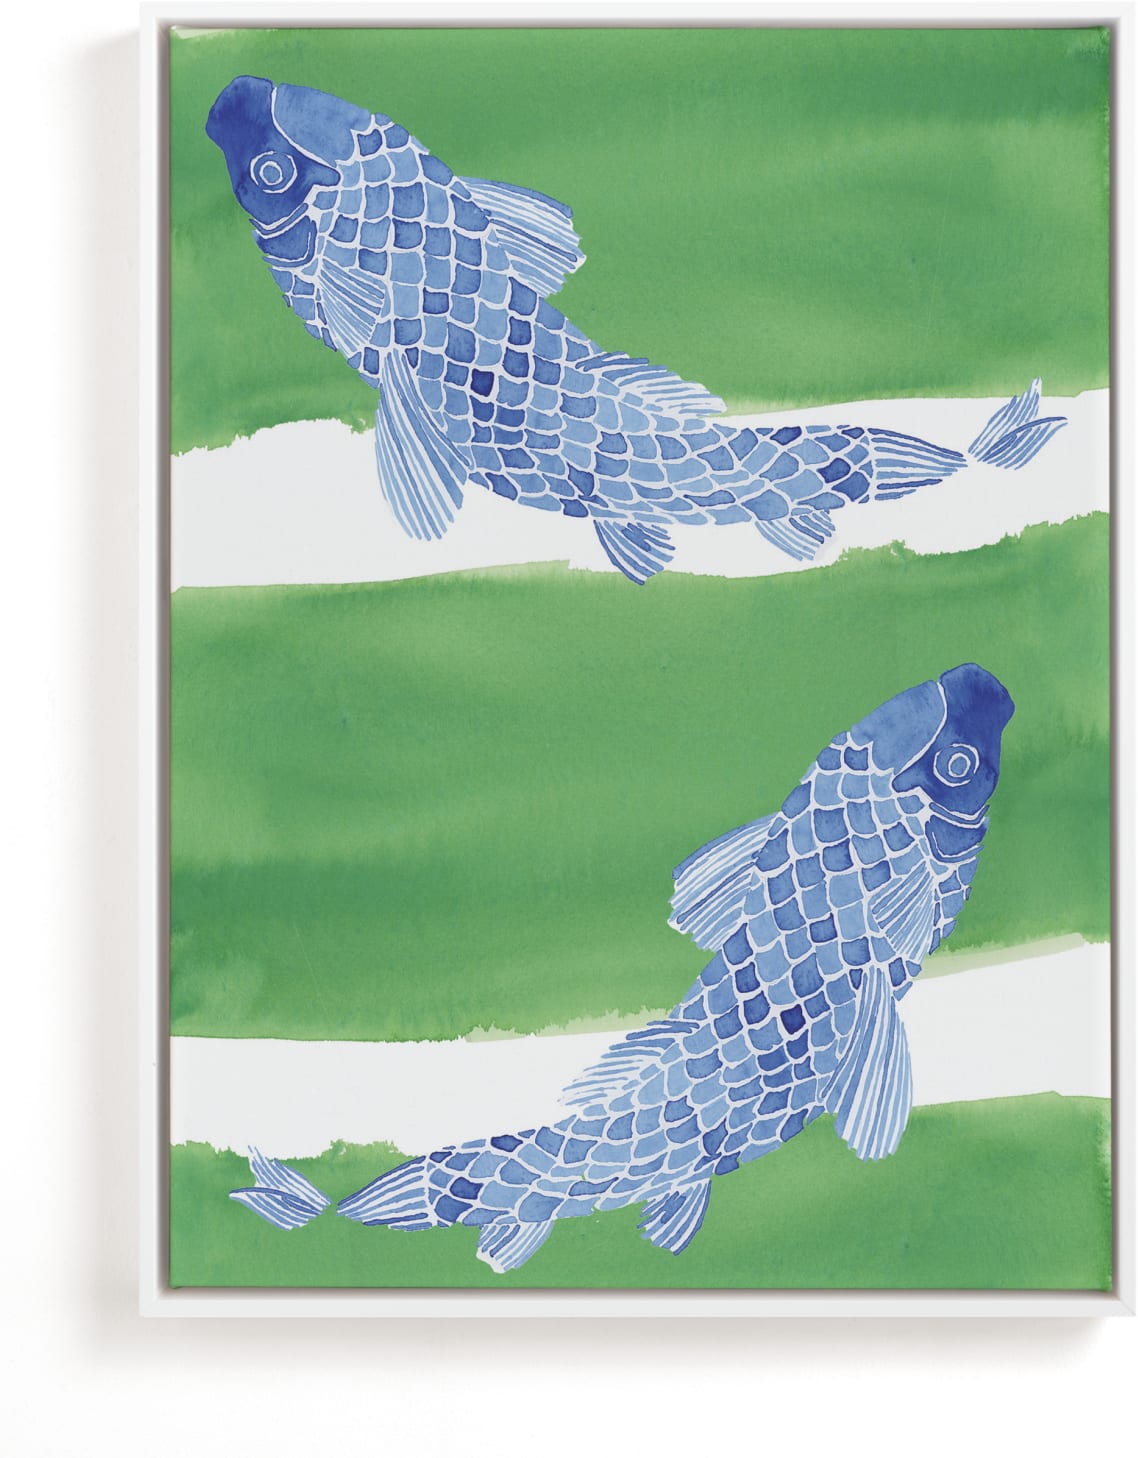 This is a blue art by Emily Bremner Forbes called Swimming Carp.